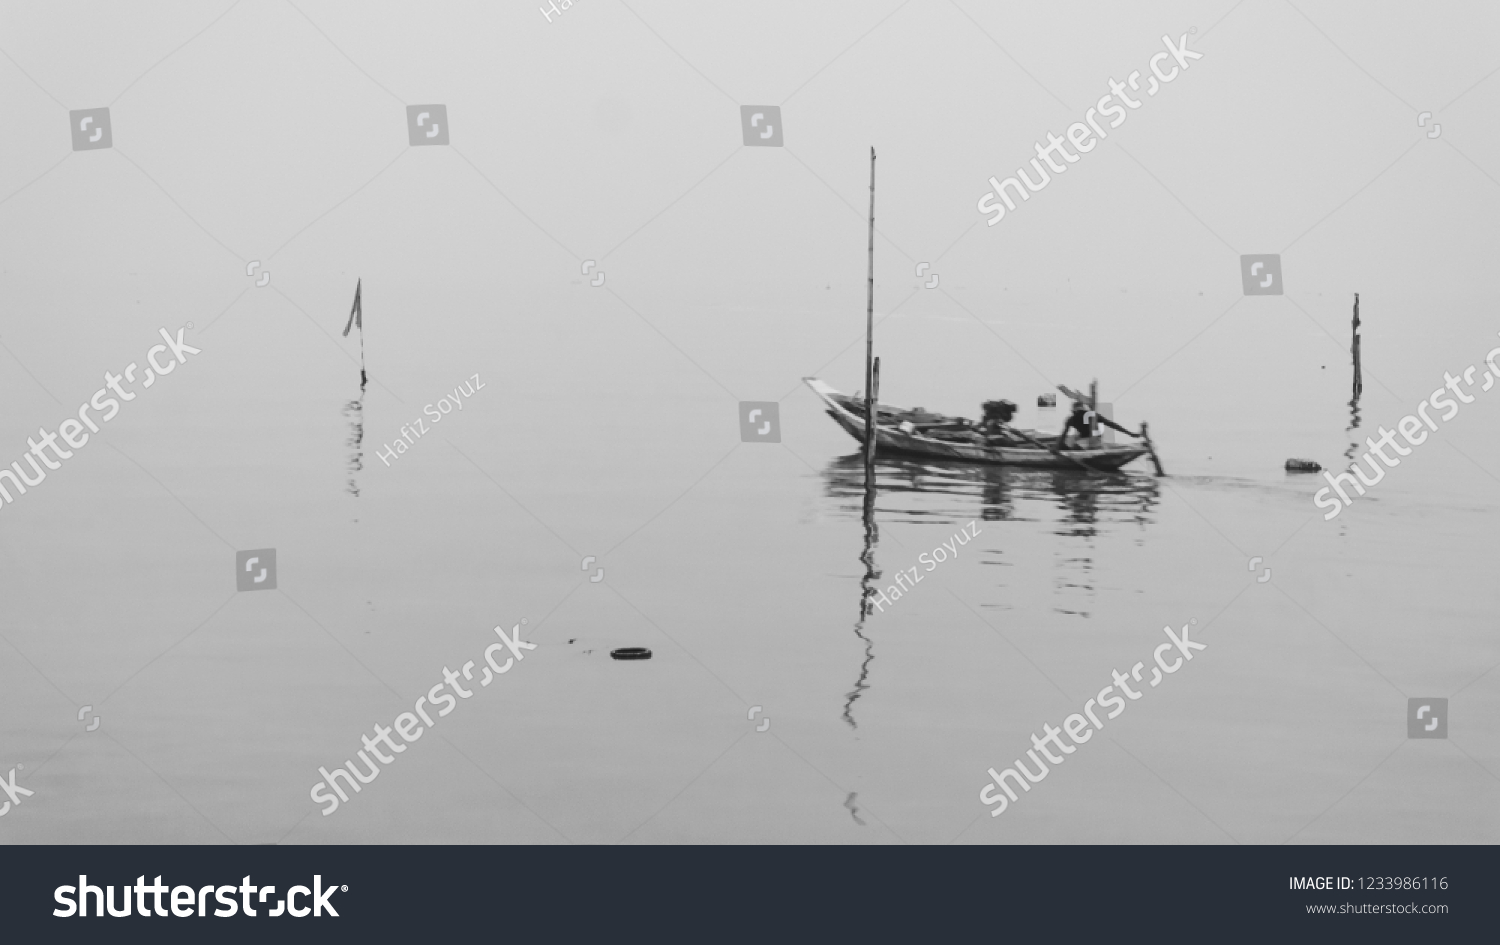 Amazing fine art black & white landscapes photograph of a fisherman boat on the beach at Pantai Kenjeran, Surabaya. (noise grain soft focus motion blurry due to long exposure) Nature composition #1233986116